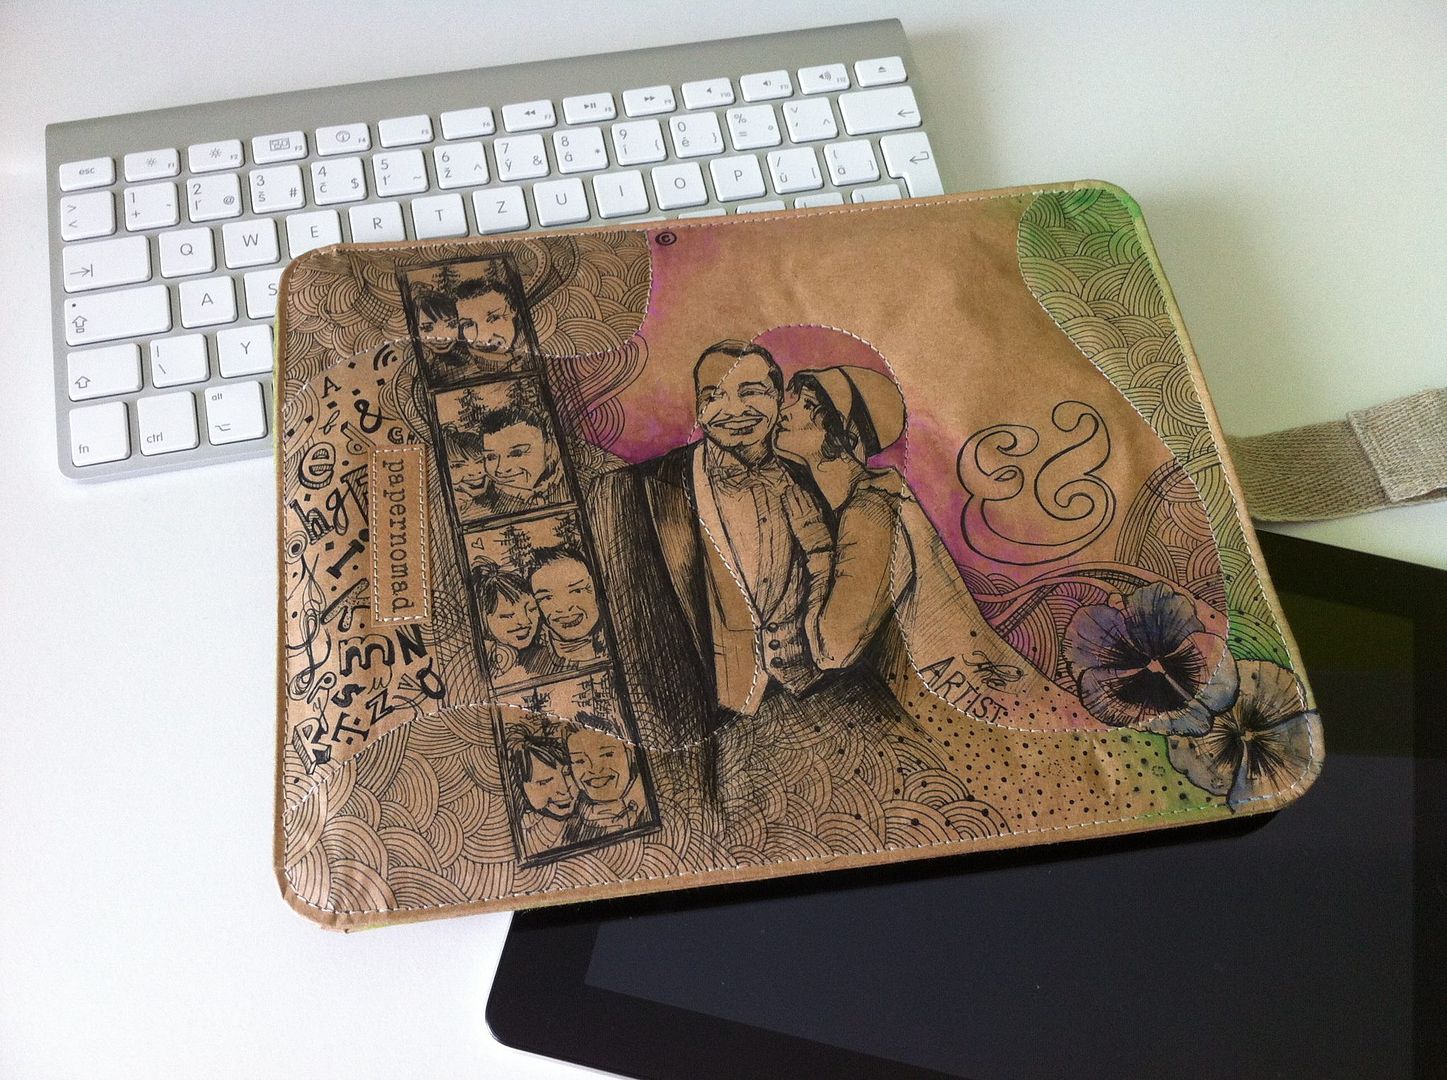 Papernomad: Customize your own iPad, Macbook, or Galaxy case